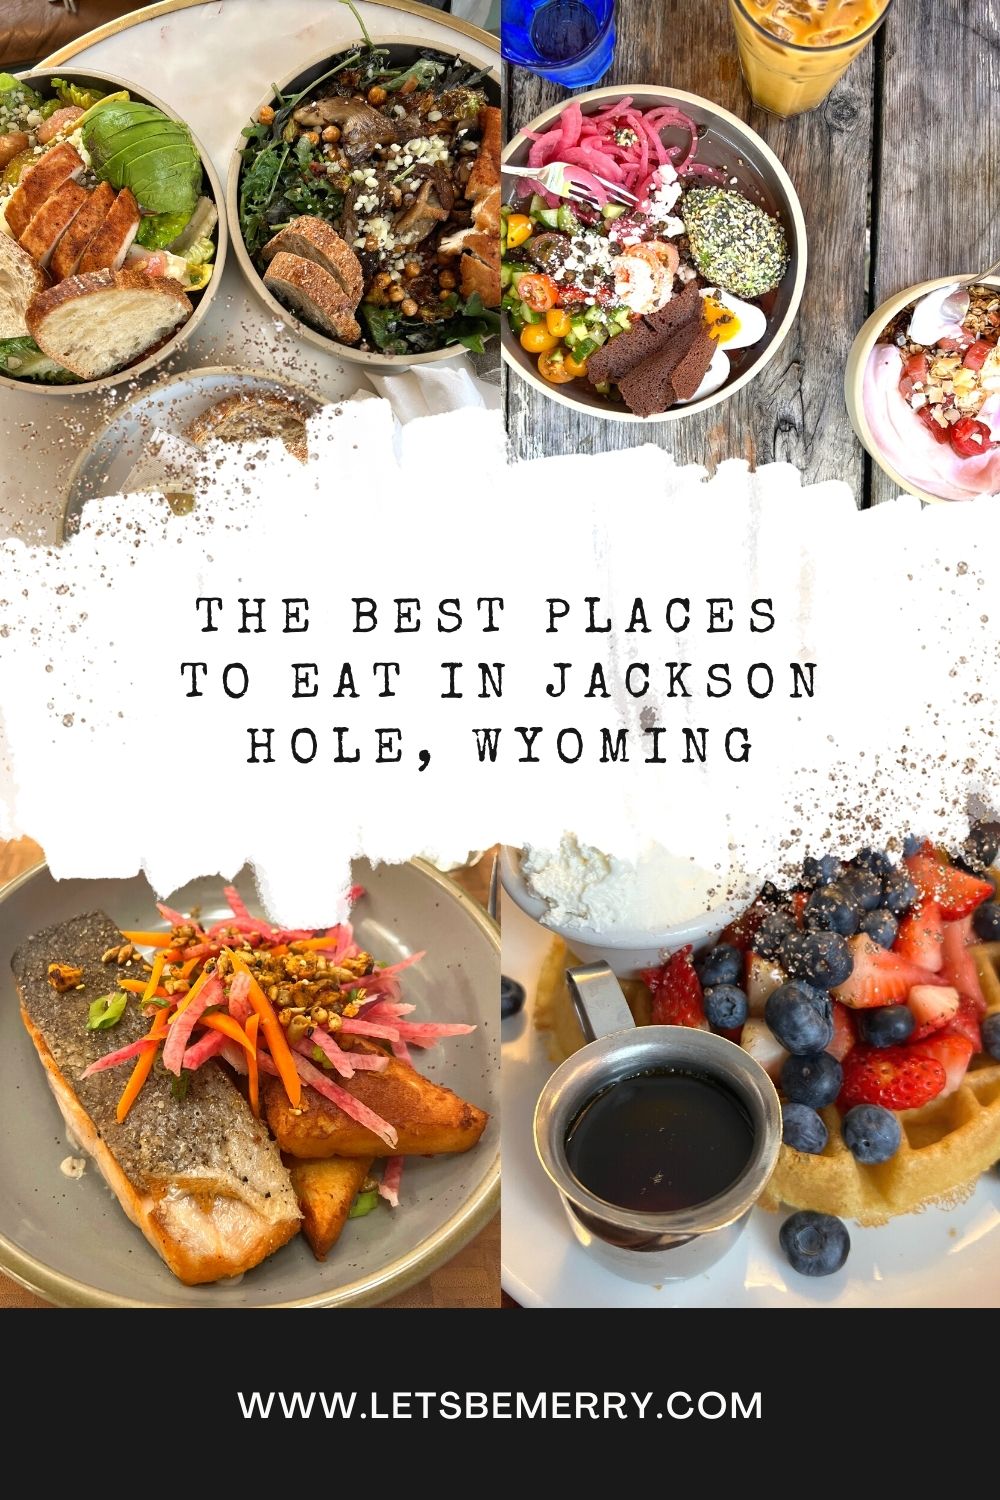 The Best Places to Eat in Jackson Hole, Wyoming